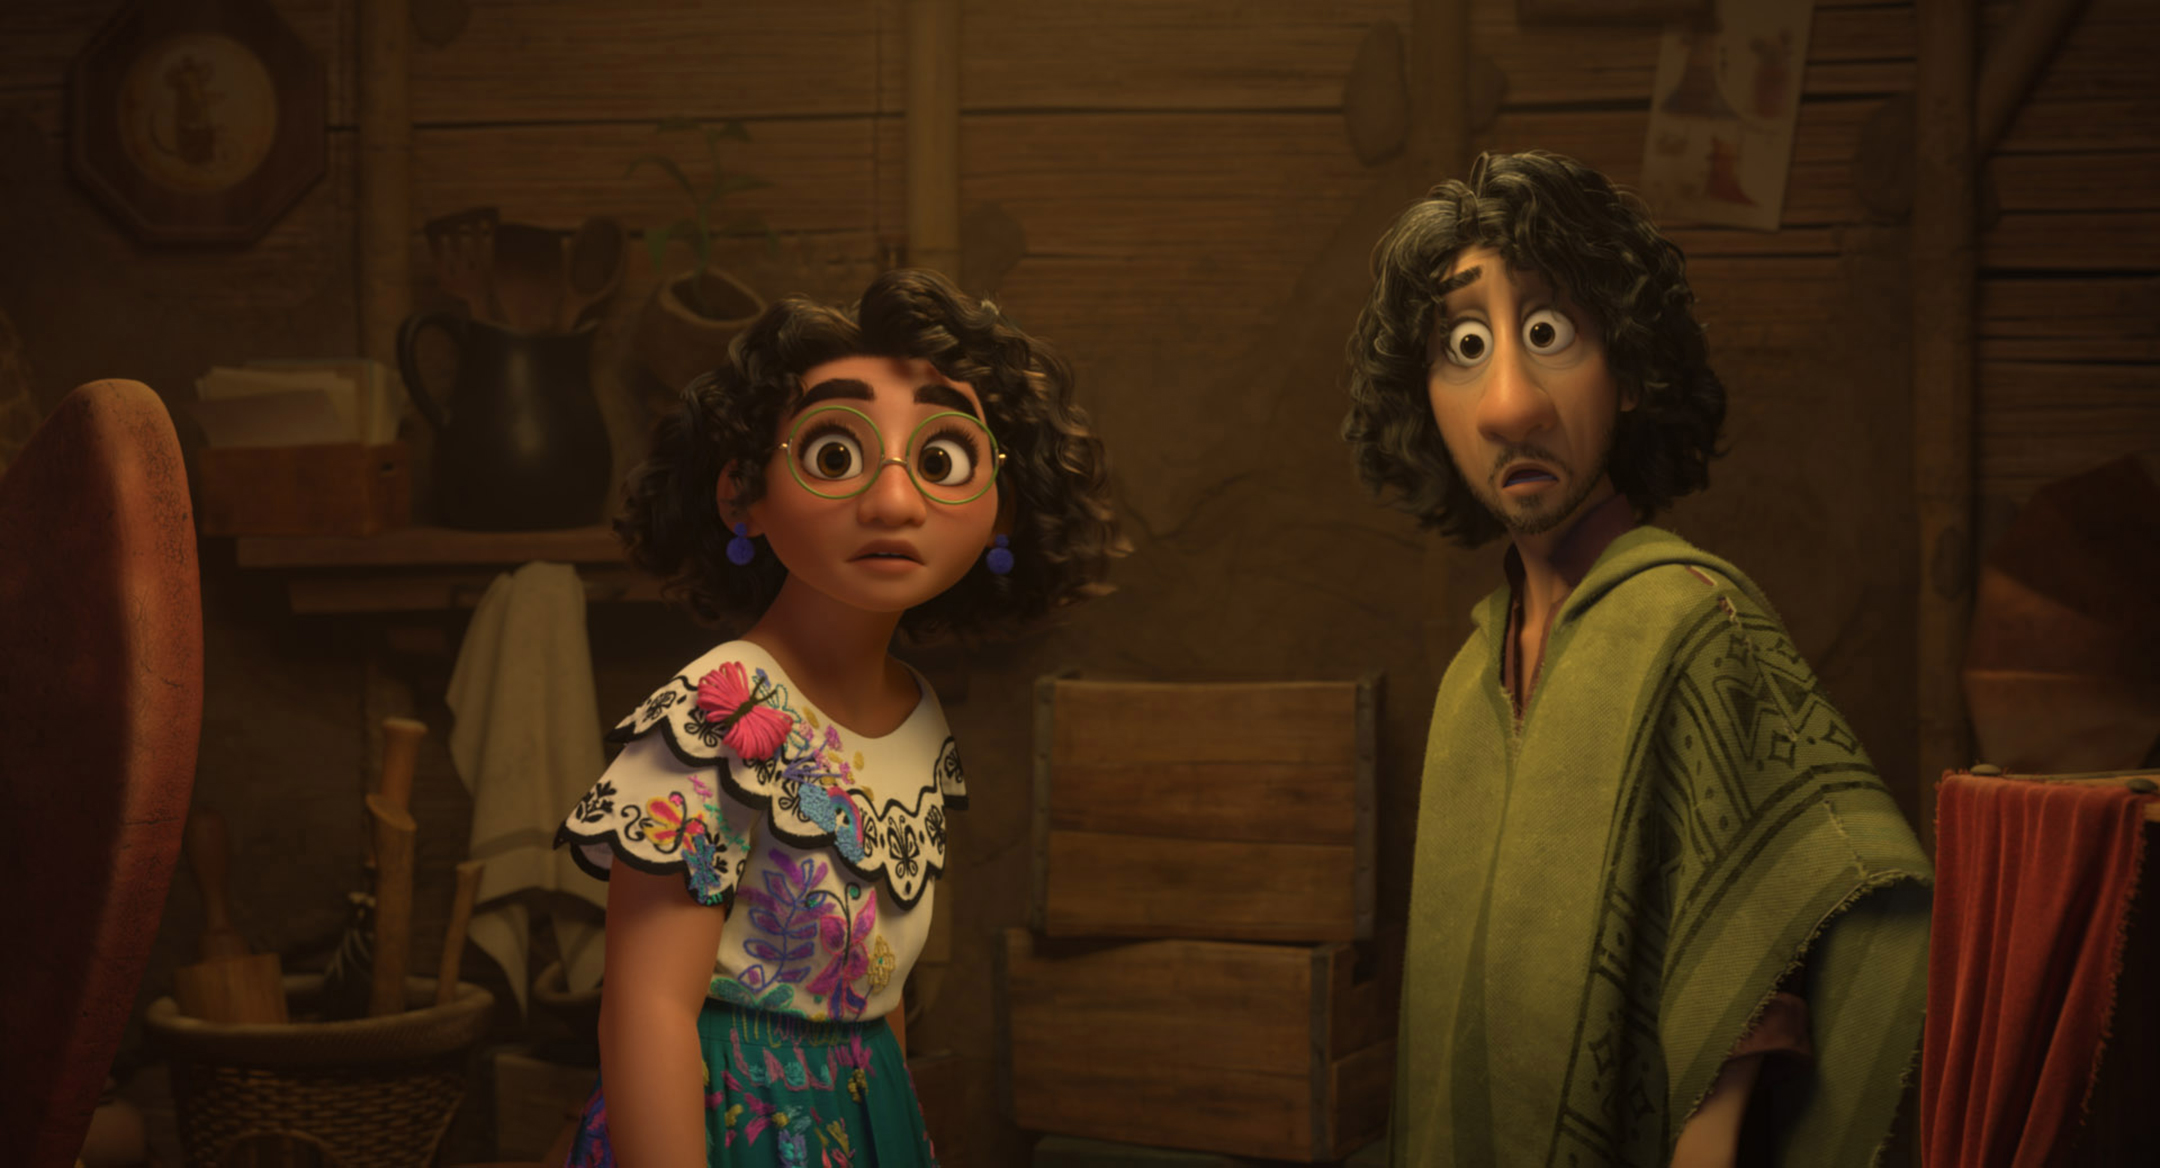 Scene from the animated movie Encanto with Mirabel on the left and Bruno on the right